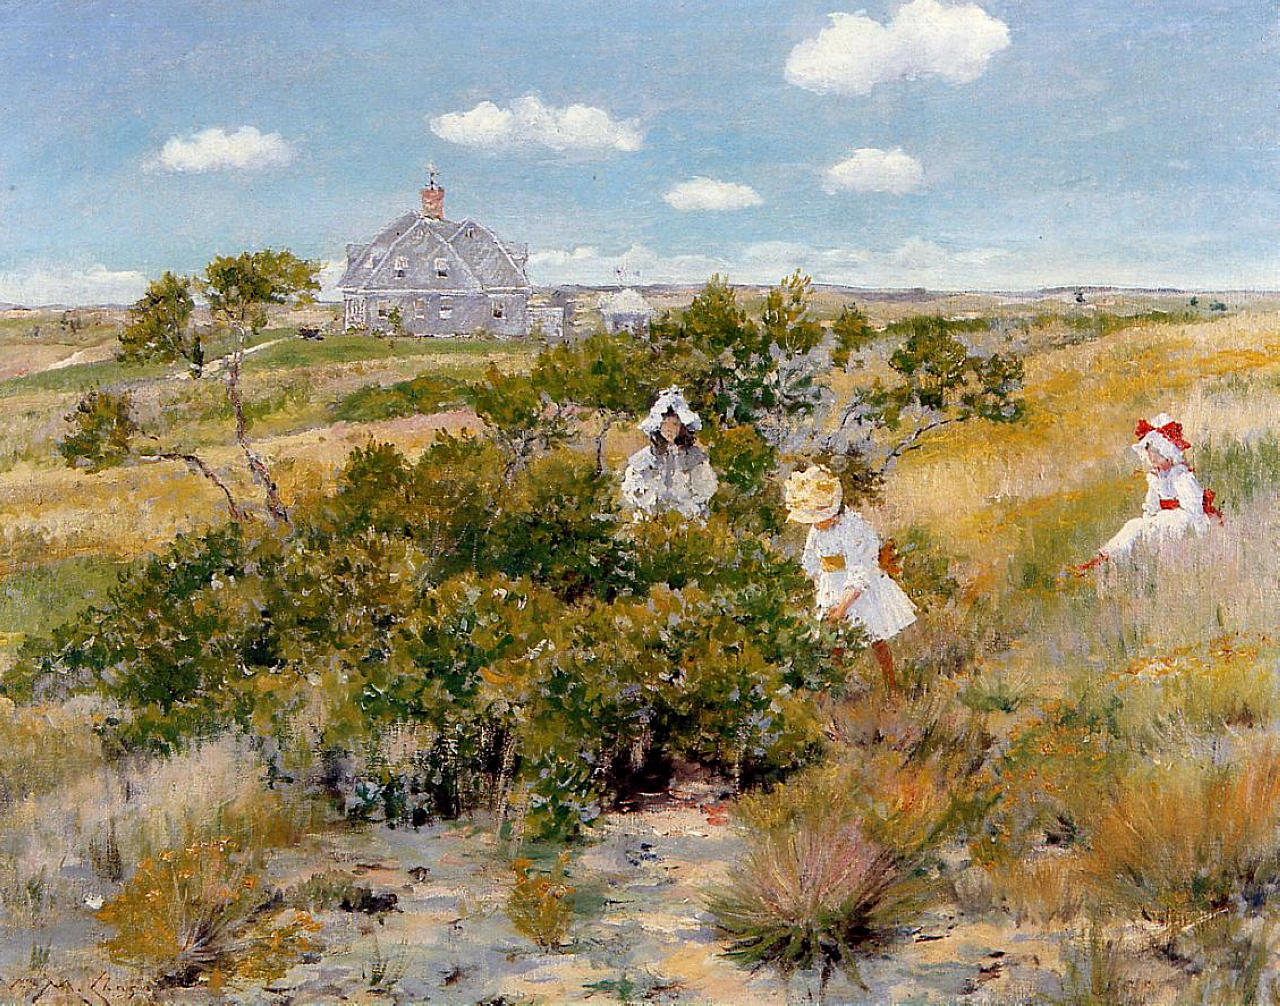 Le Bayberry bush by William Merritt Chase - ca. 1895 